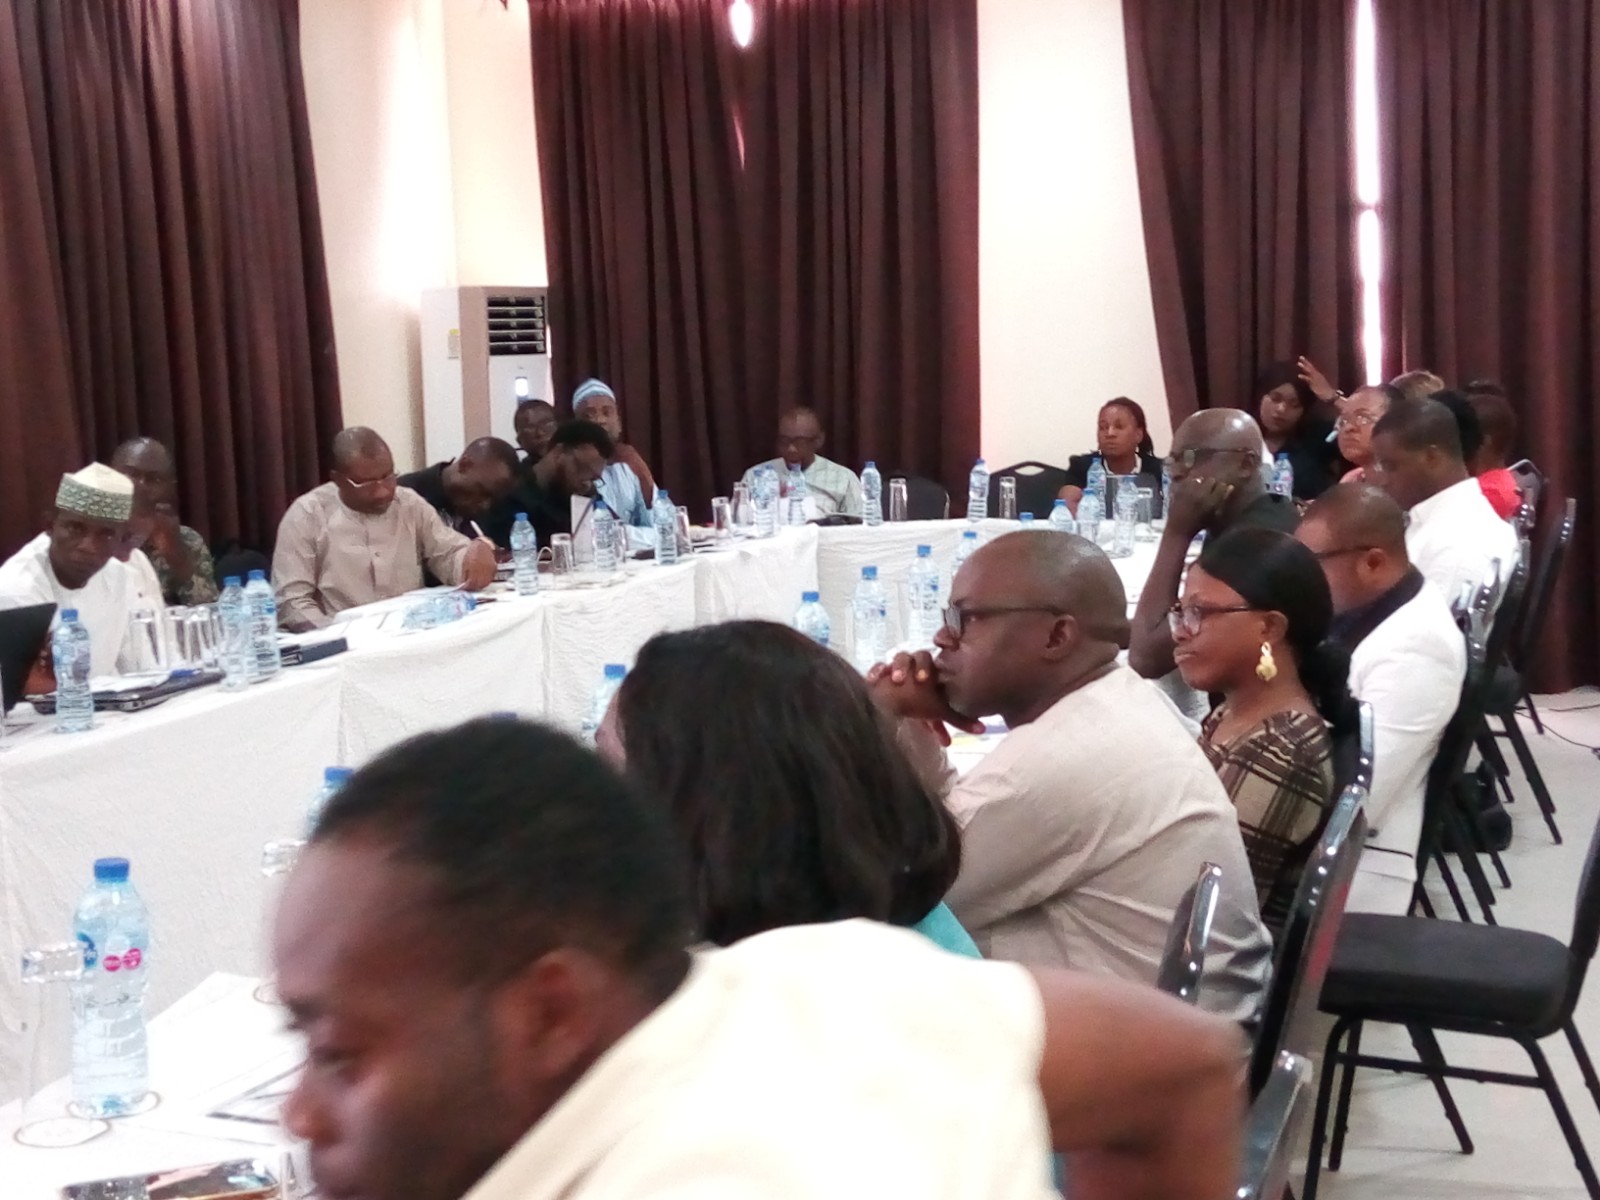 Cross section of participants at the event